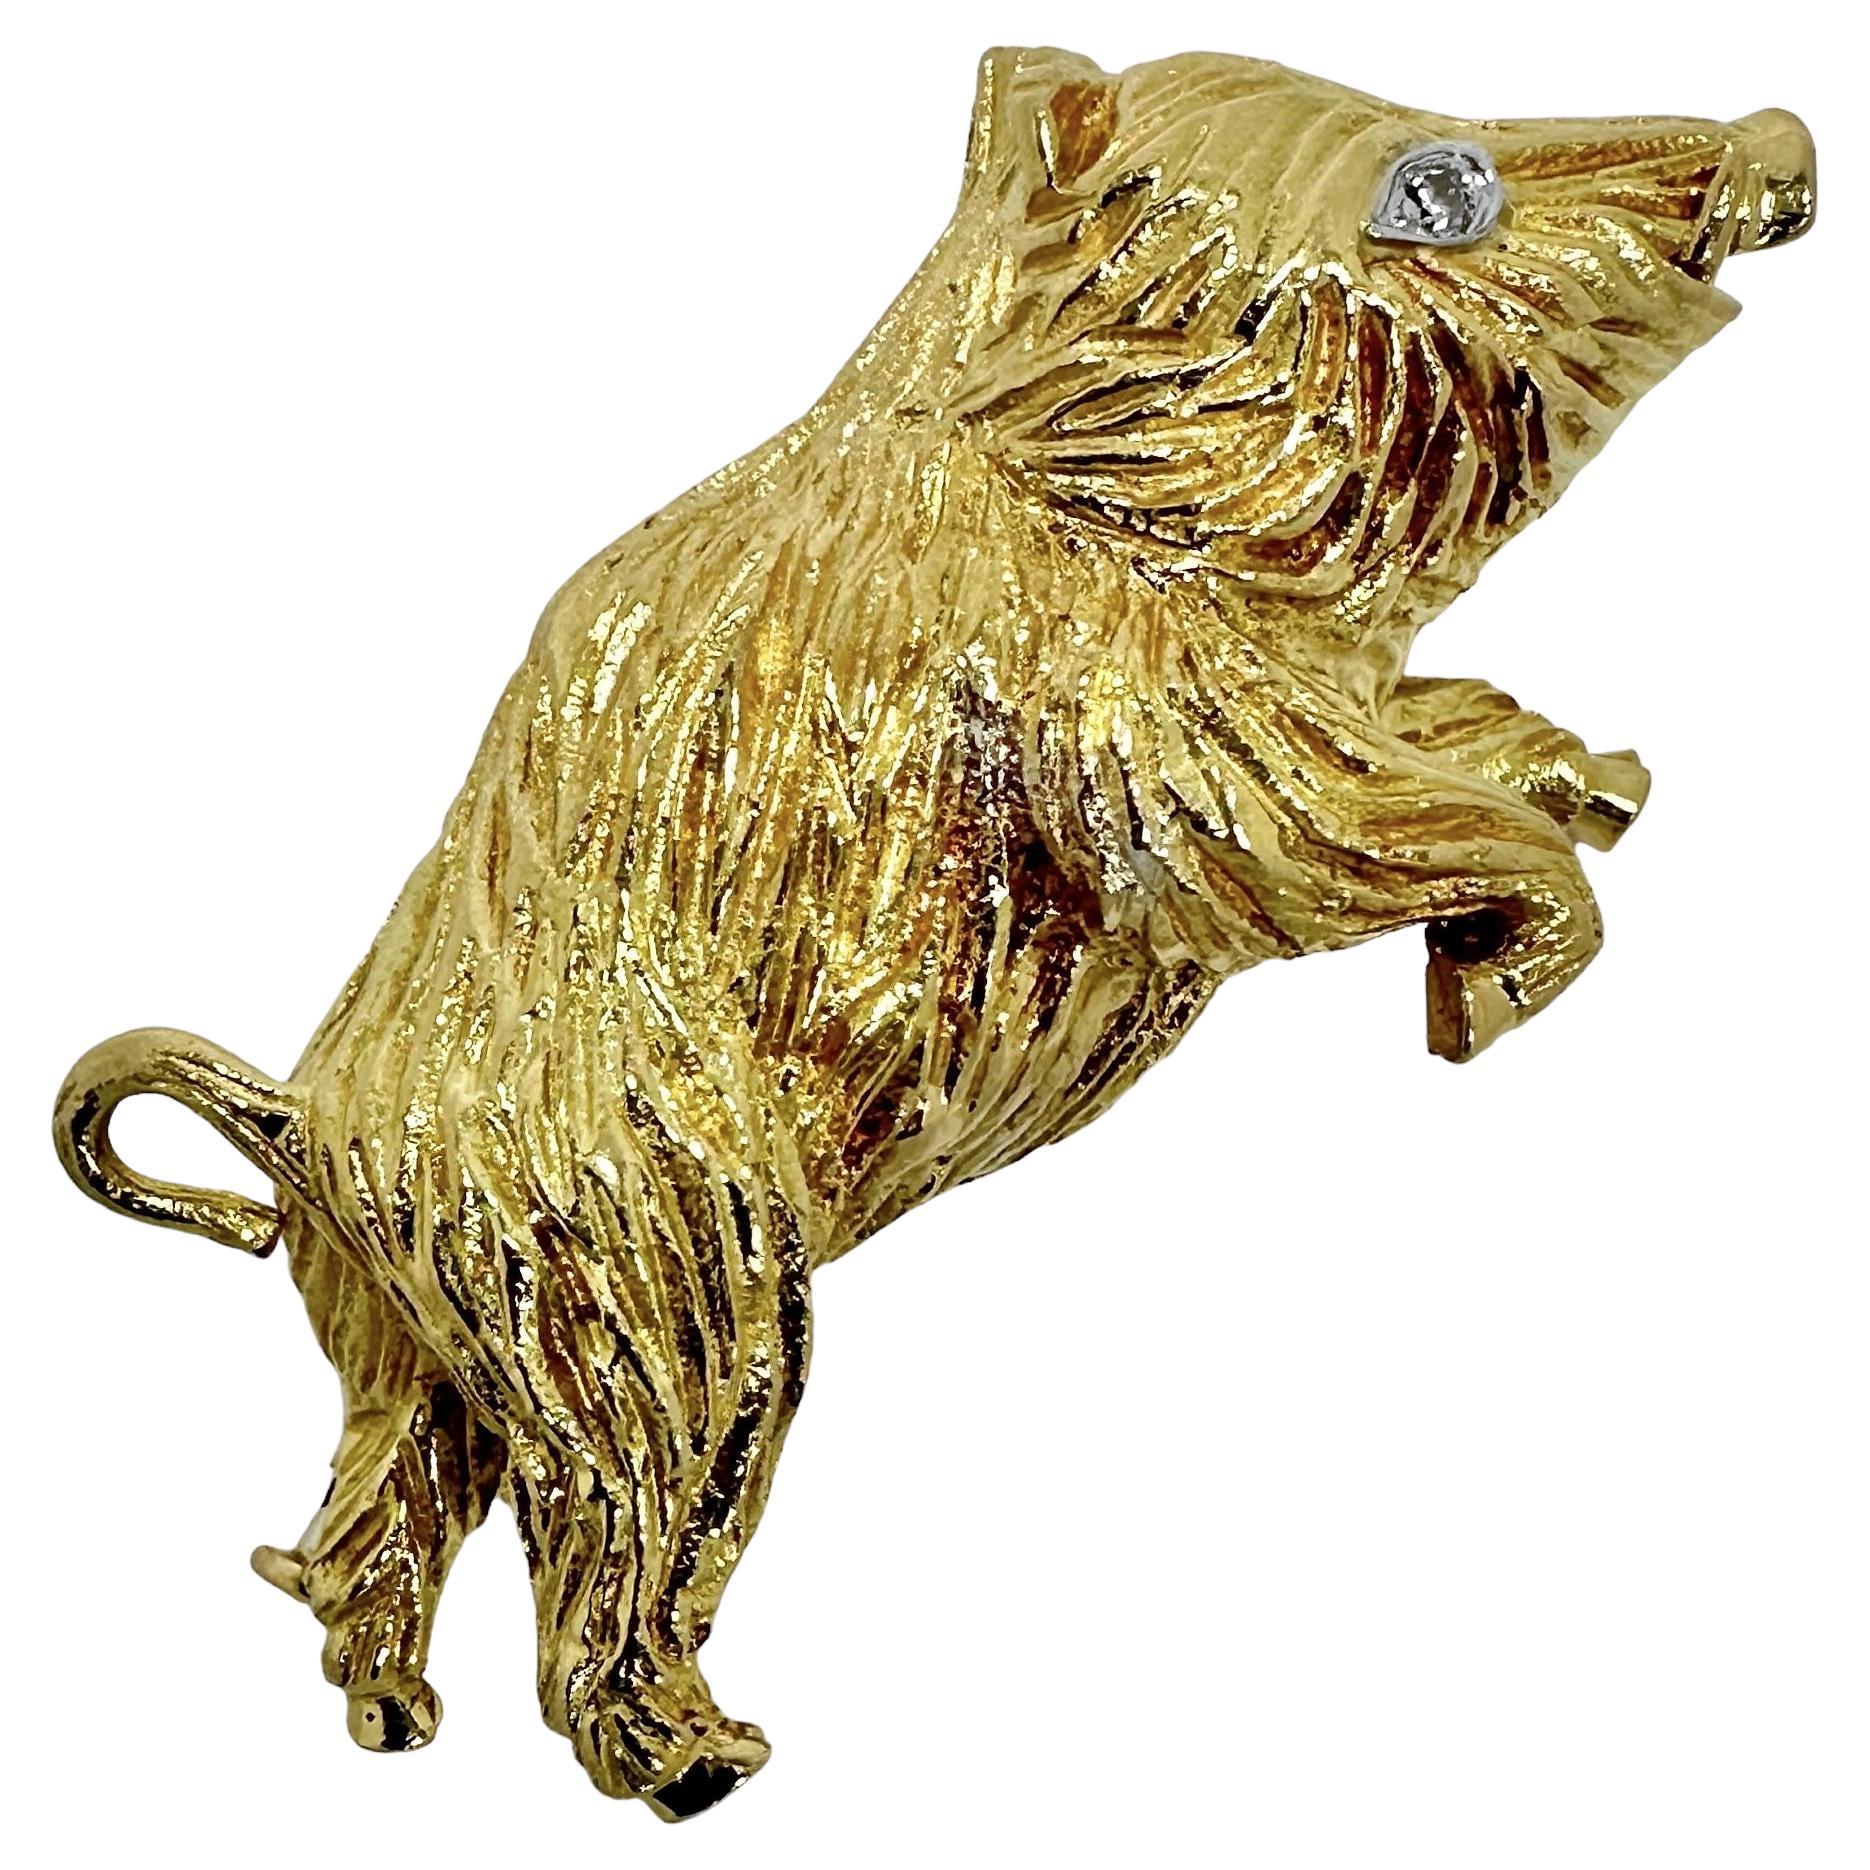 Extremely Lifelike French 18k Gold Wild Boar Brooch